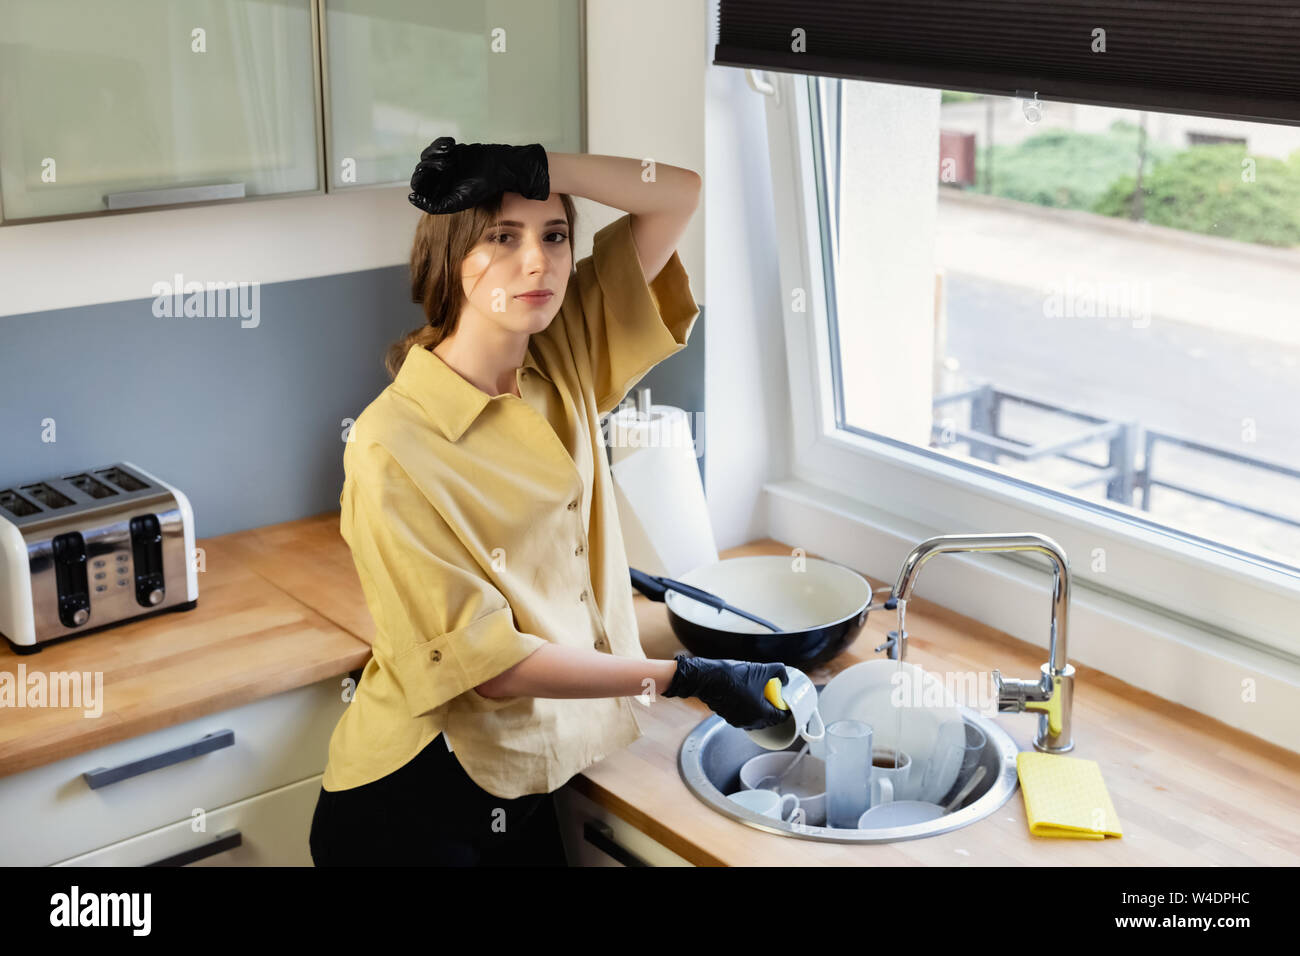 A Young Woman Cleans Up In The Kitchen Washing Dishes She Is Tired